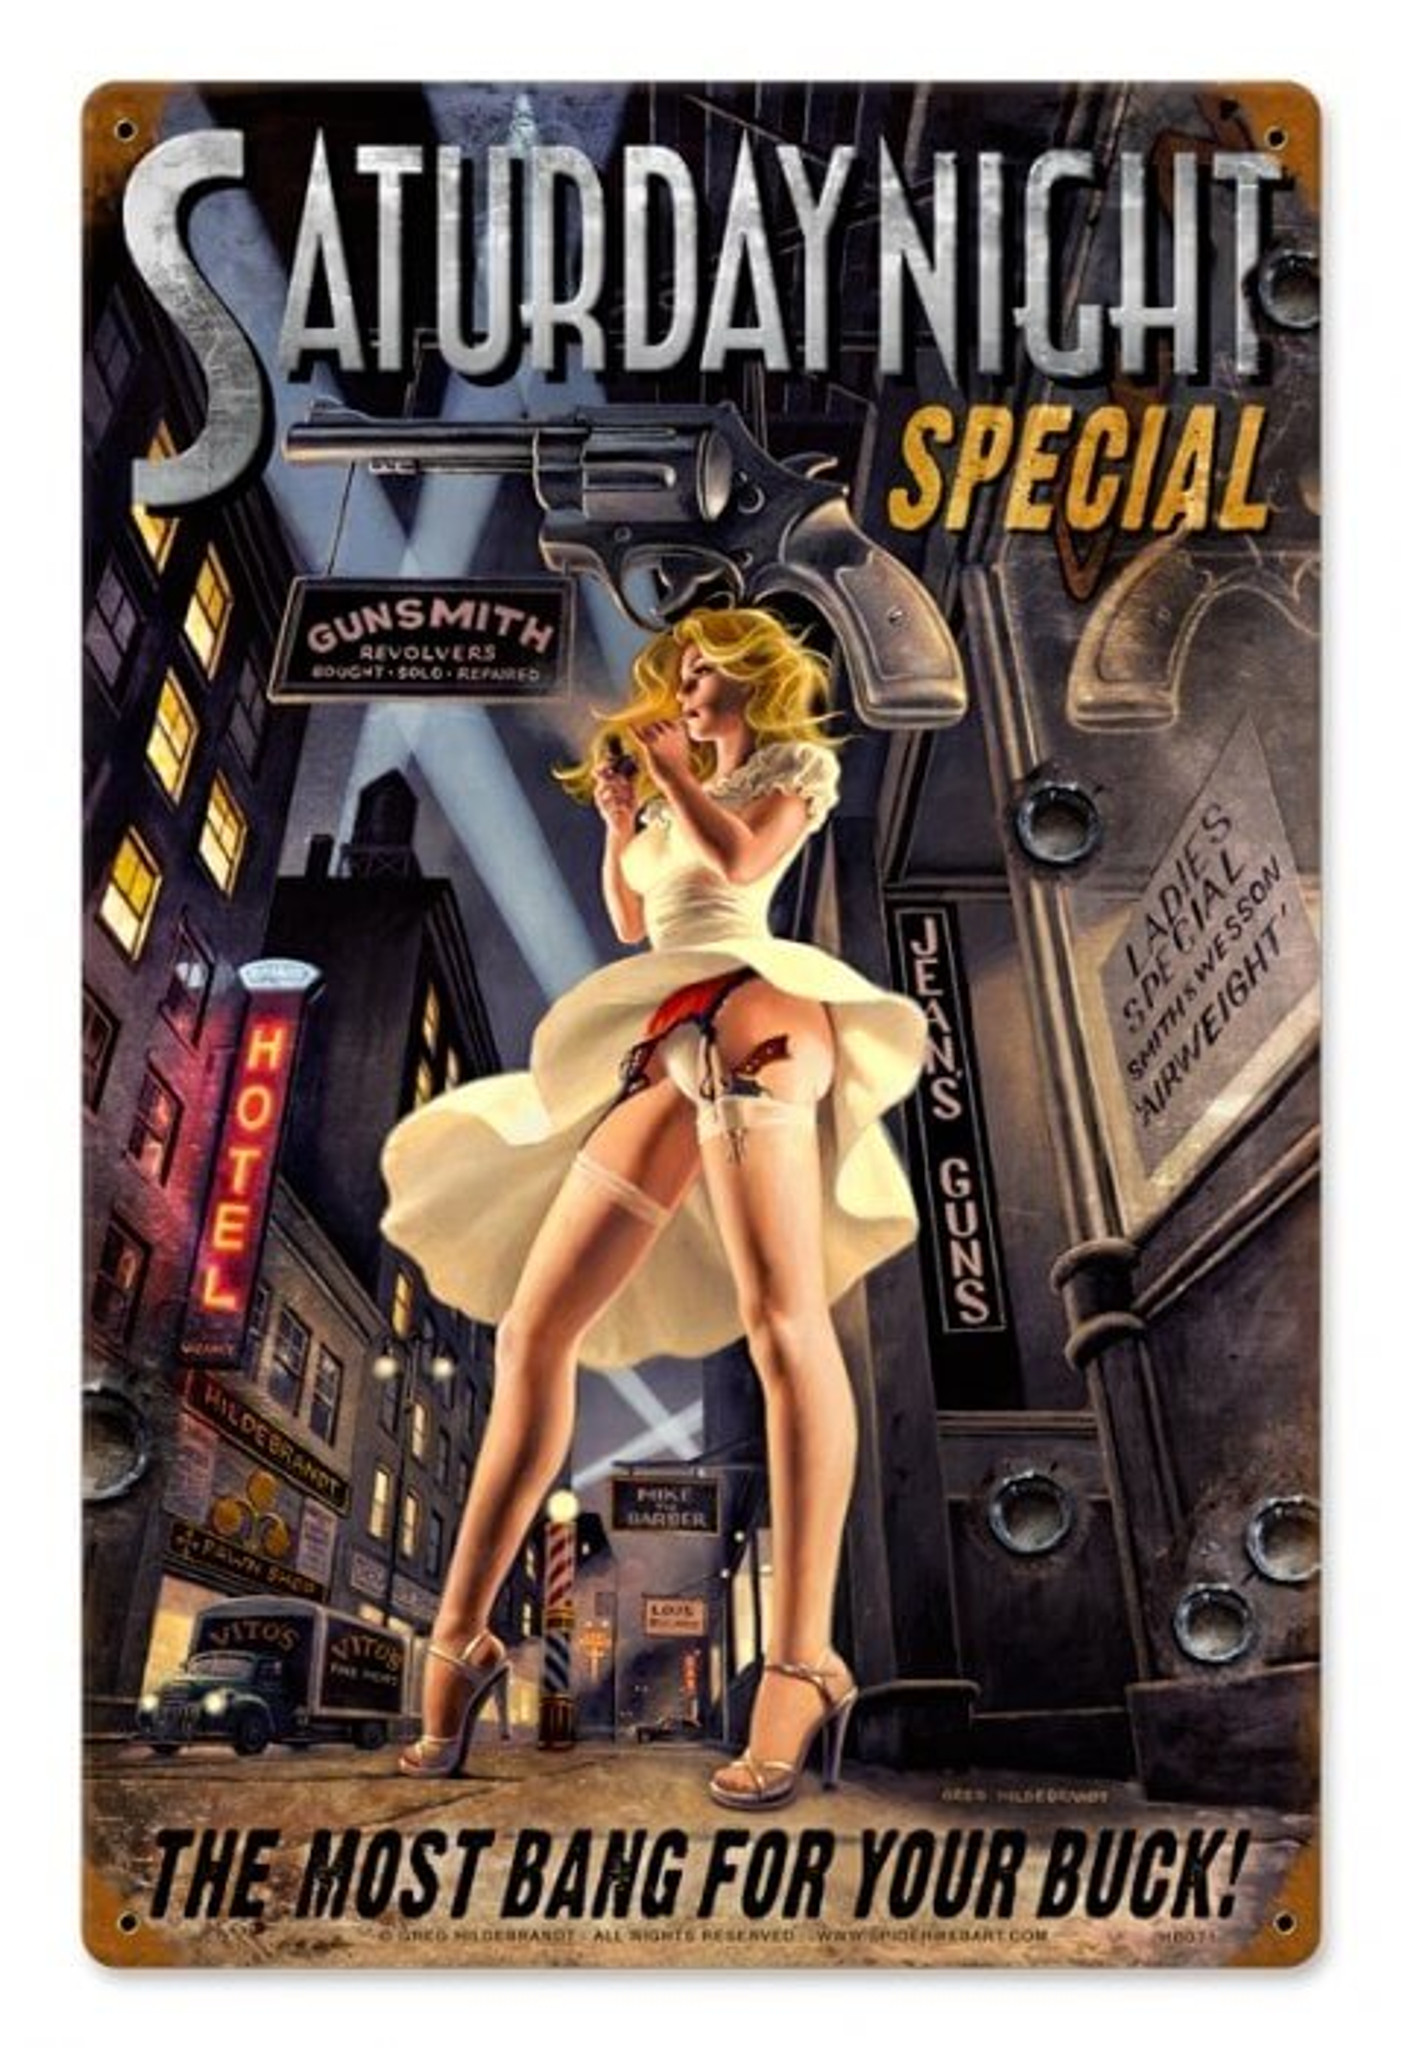 Vintage Saturday Night Special Pin Up Girl Metal Sign 12 X 18 Inches